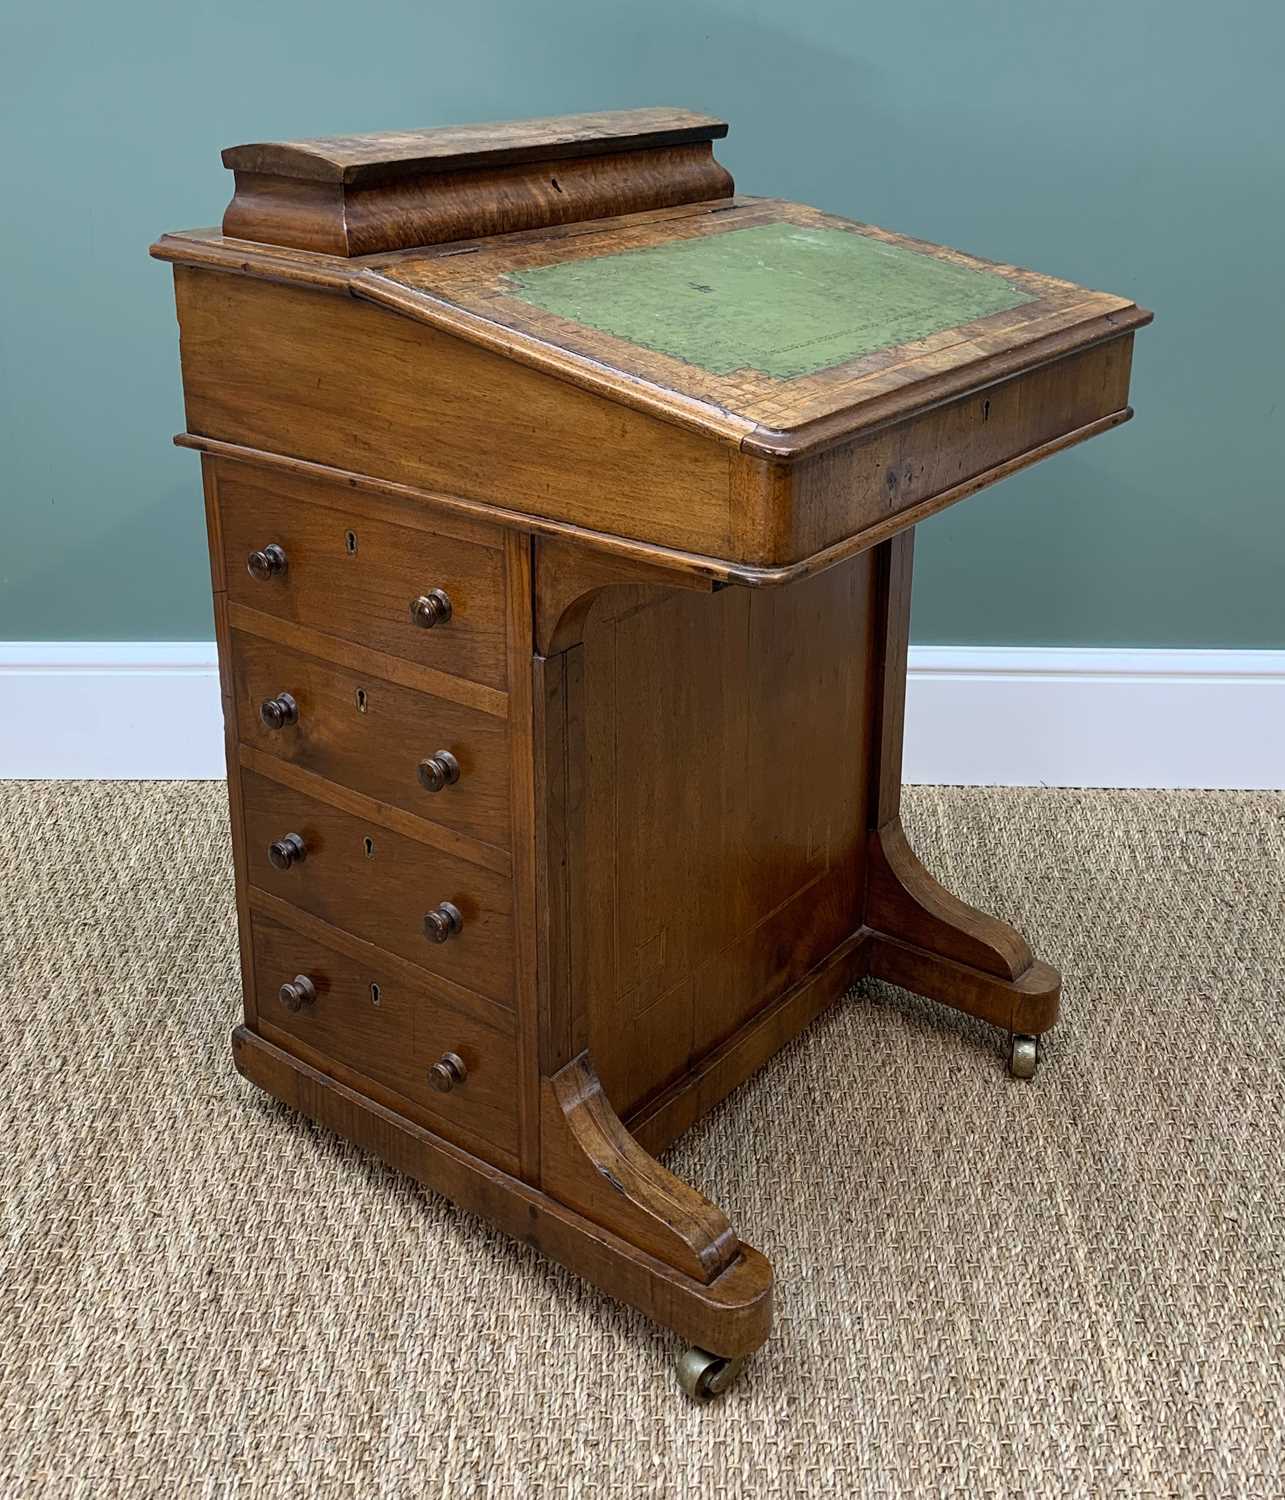 LATE VICTORIAN WALNUT DAVENPORT DESK, satinwood cross-banded decoration with stationery - Image 4 of 5